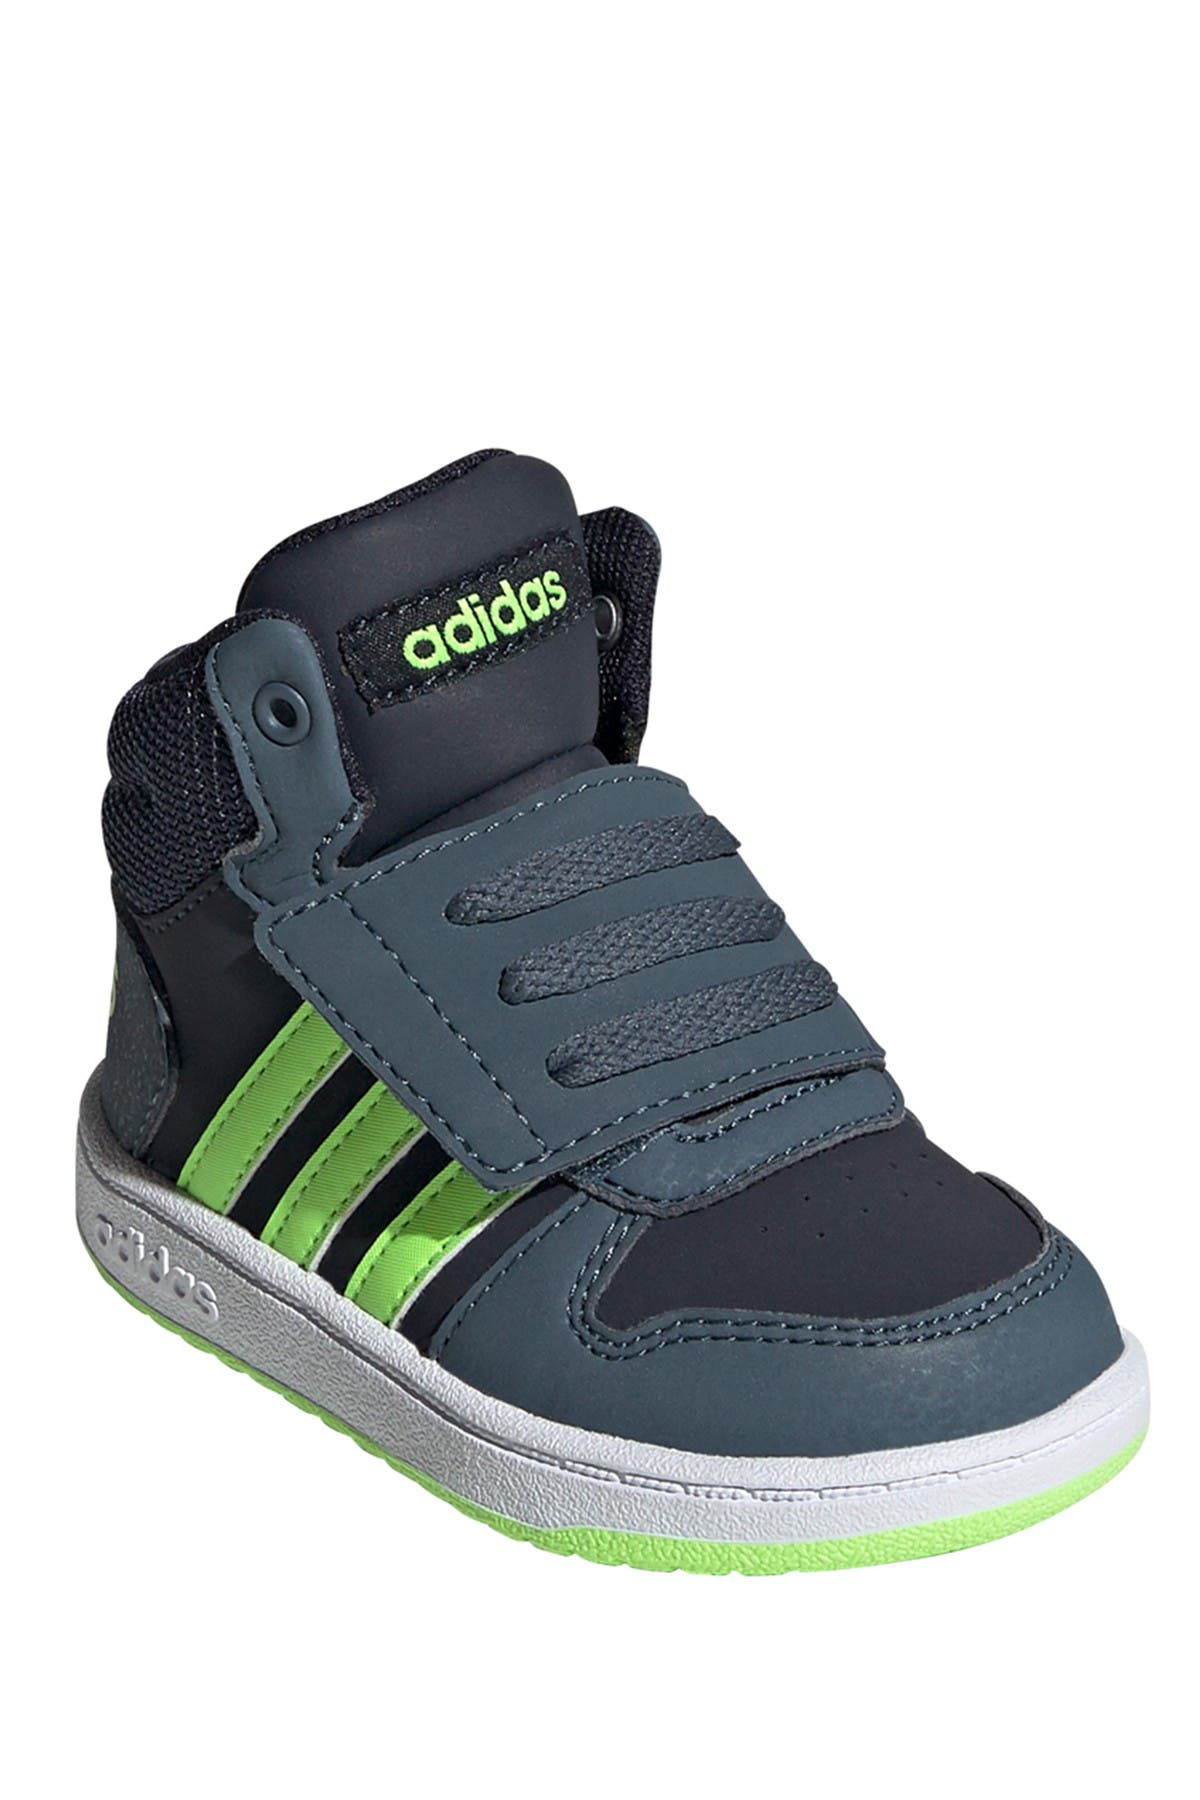 adidas baby high top shoes